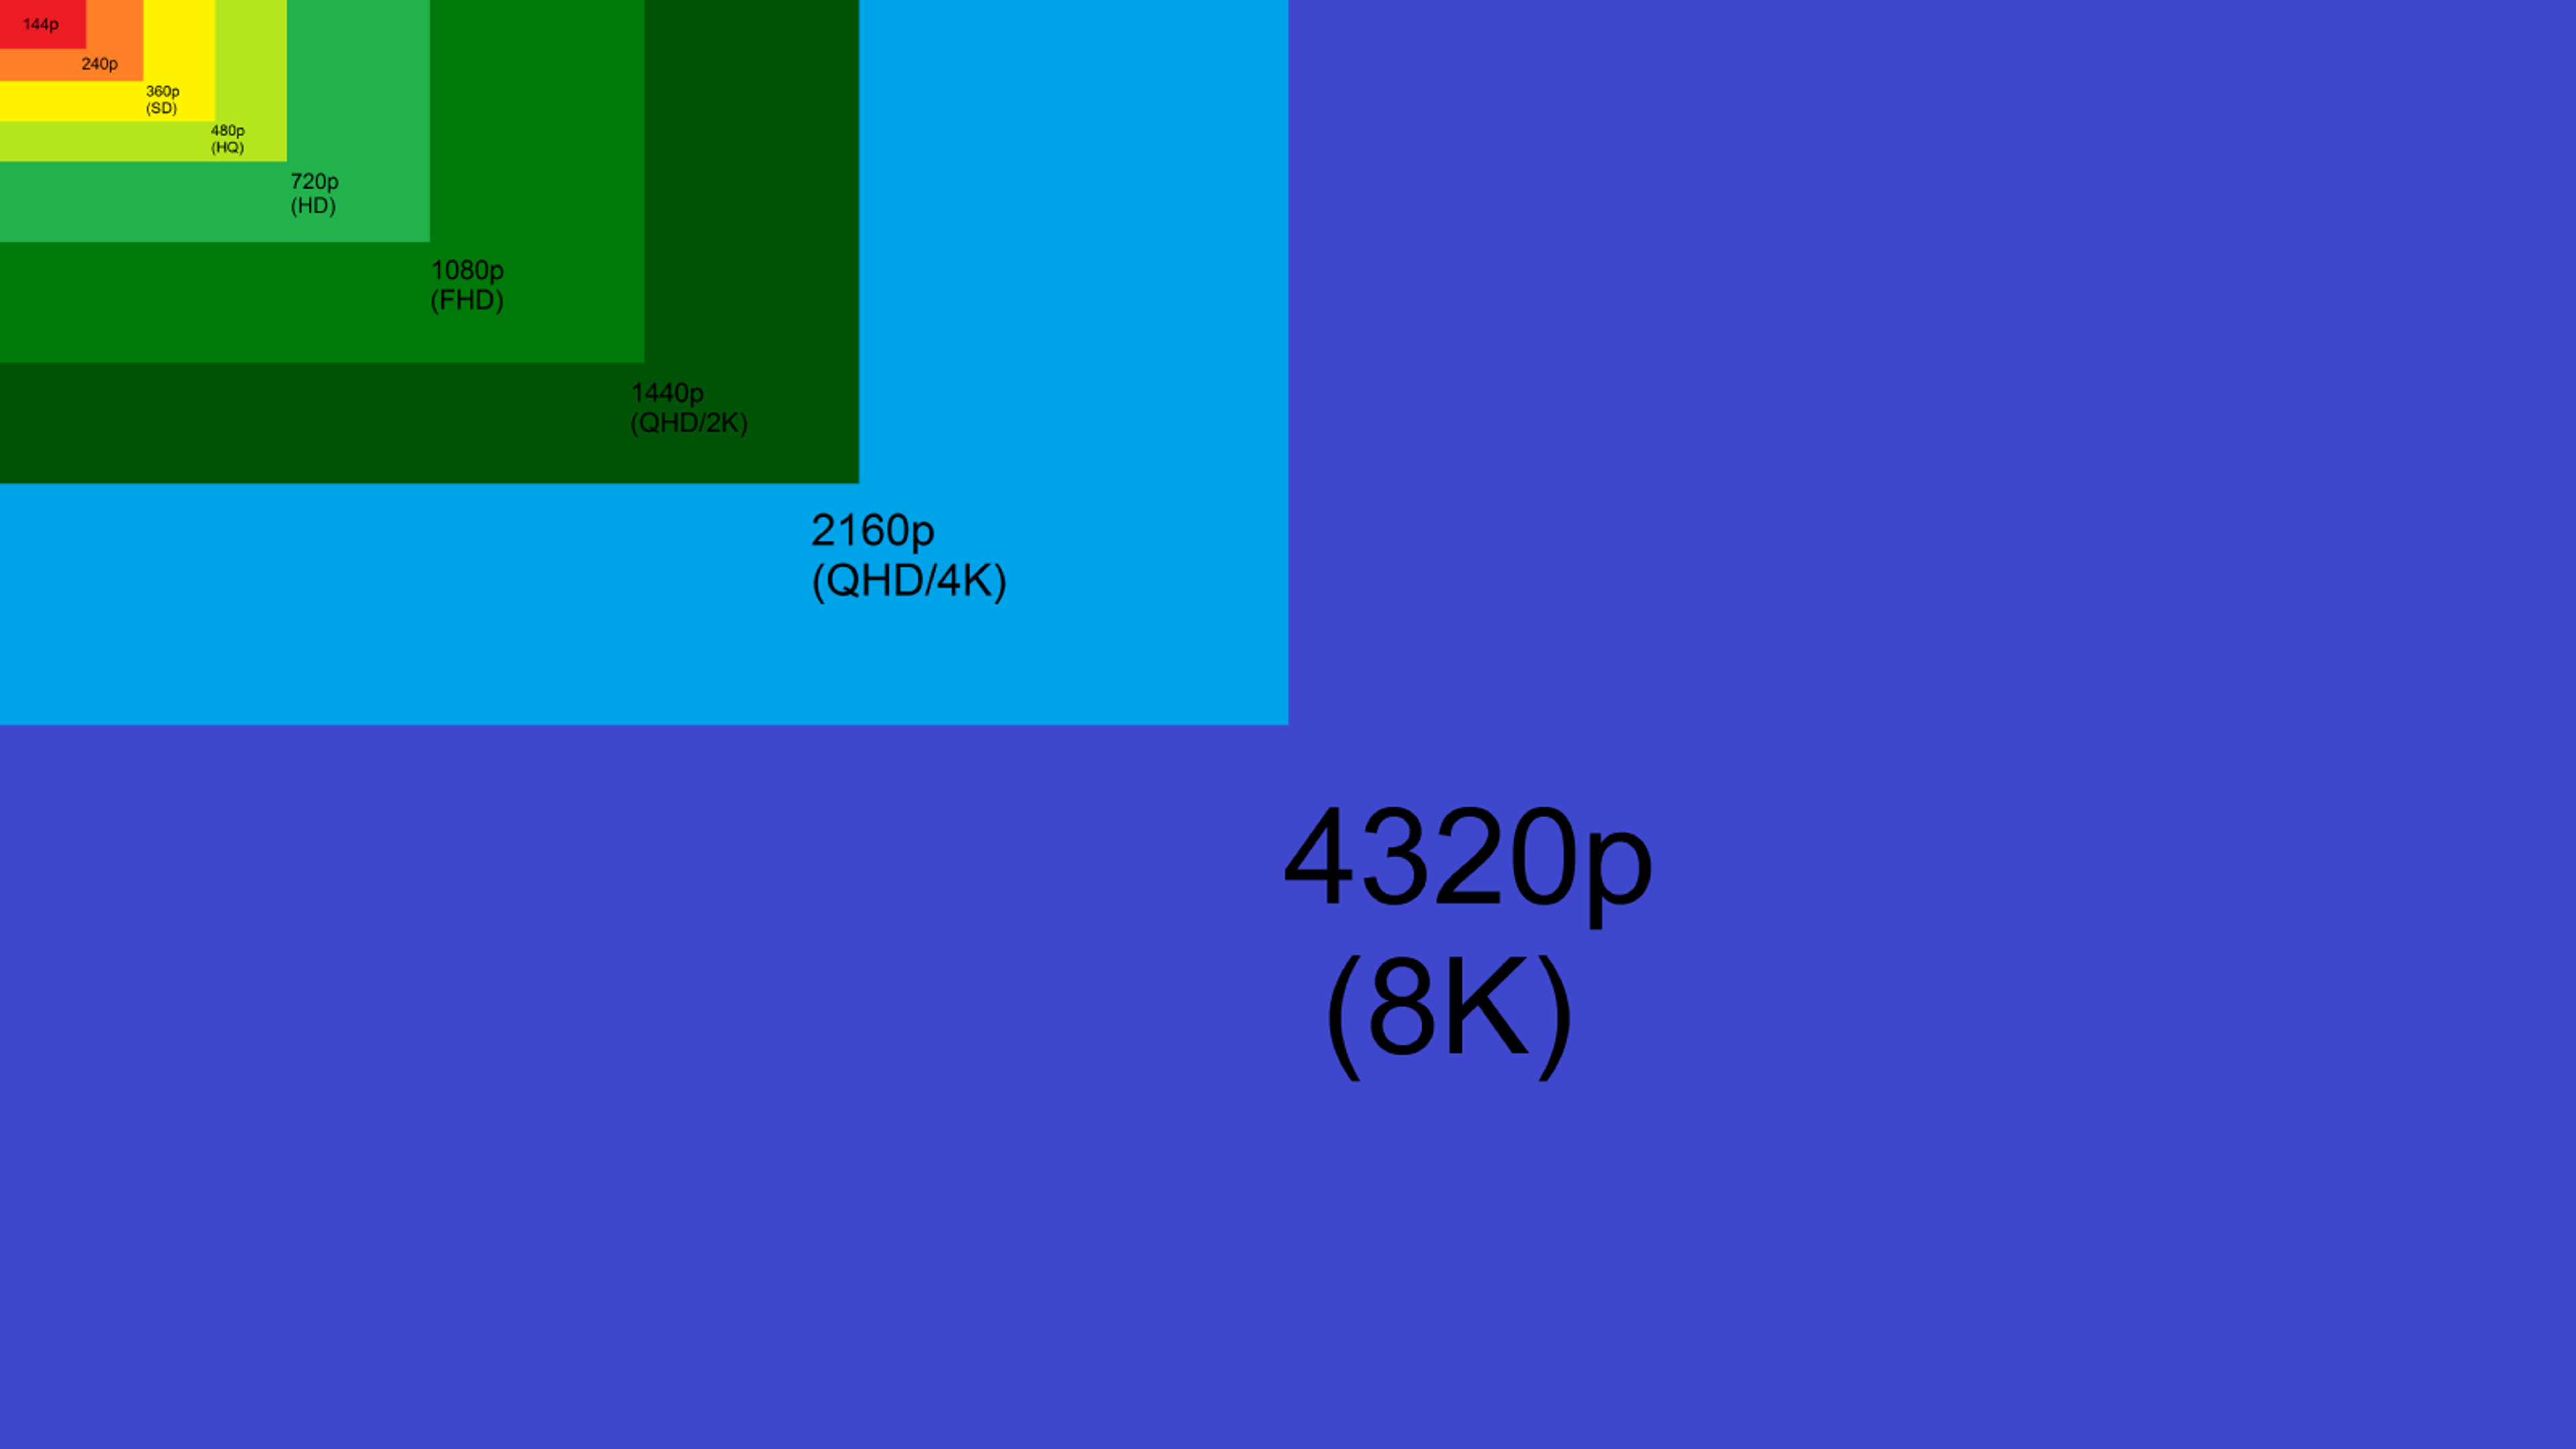 Pixel counts for different video resolutions